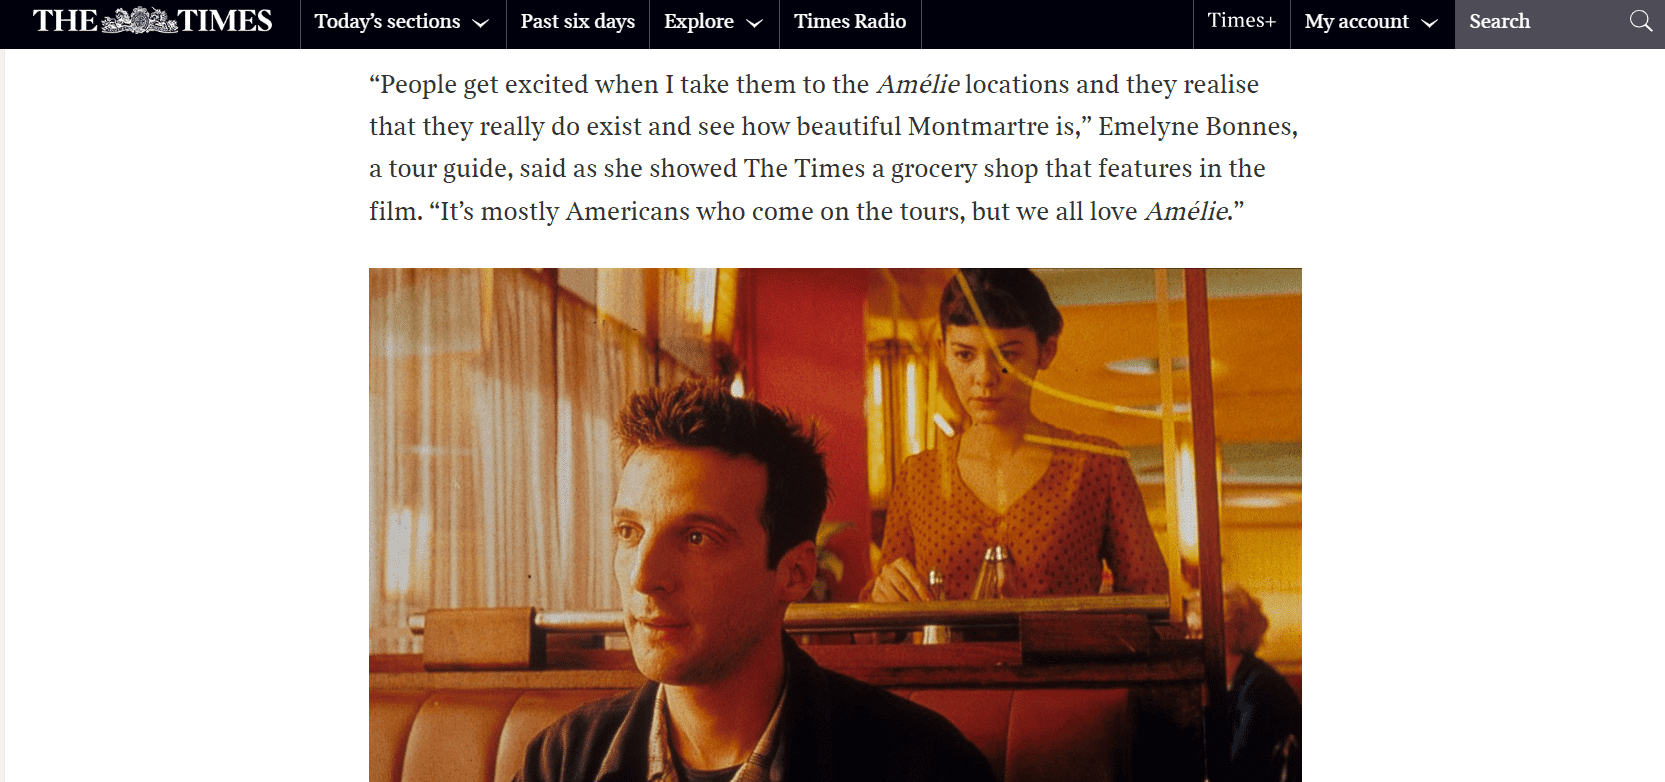 Amelie movie tour by Emelyne Bonnes PARIS BY EMY interview with the Times magazine